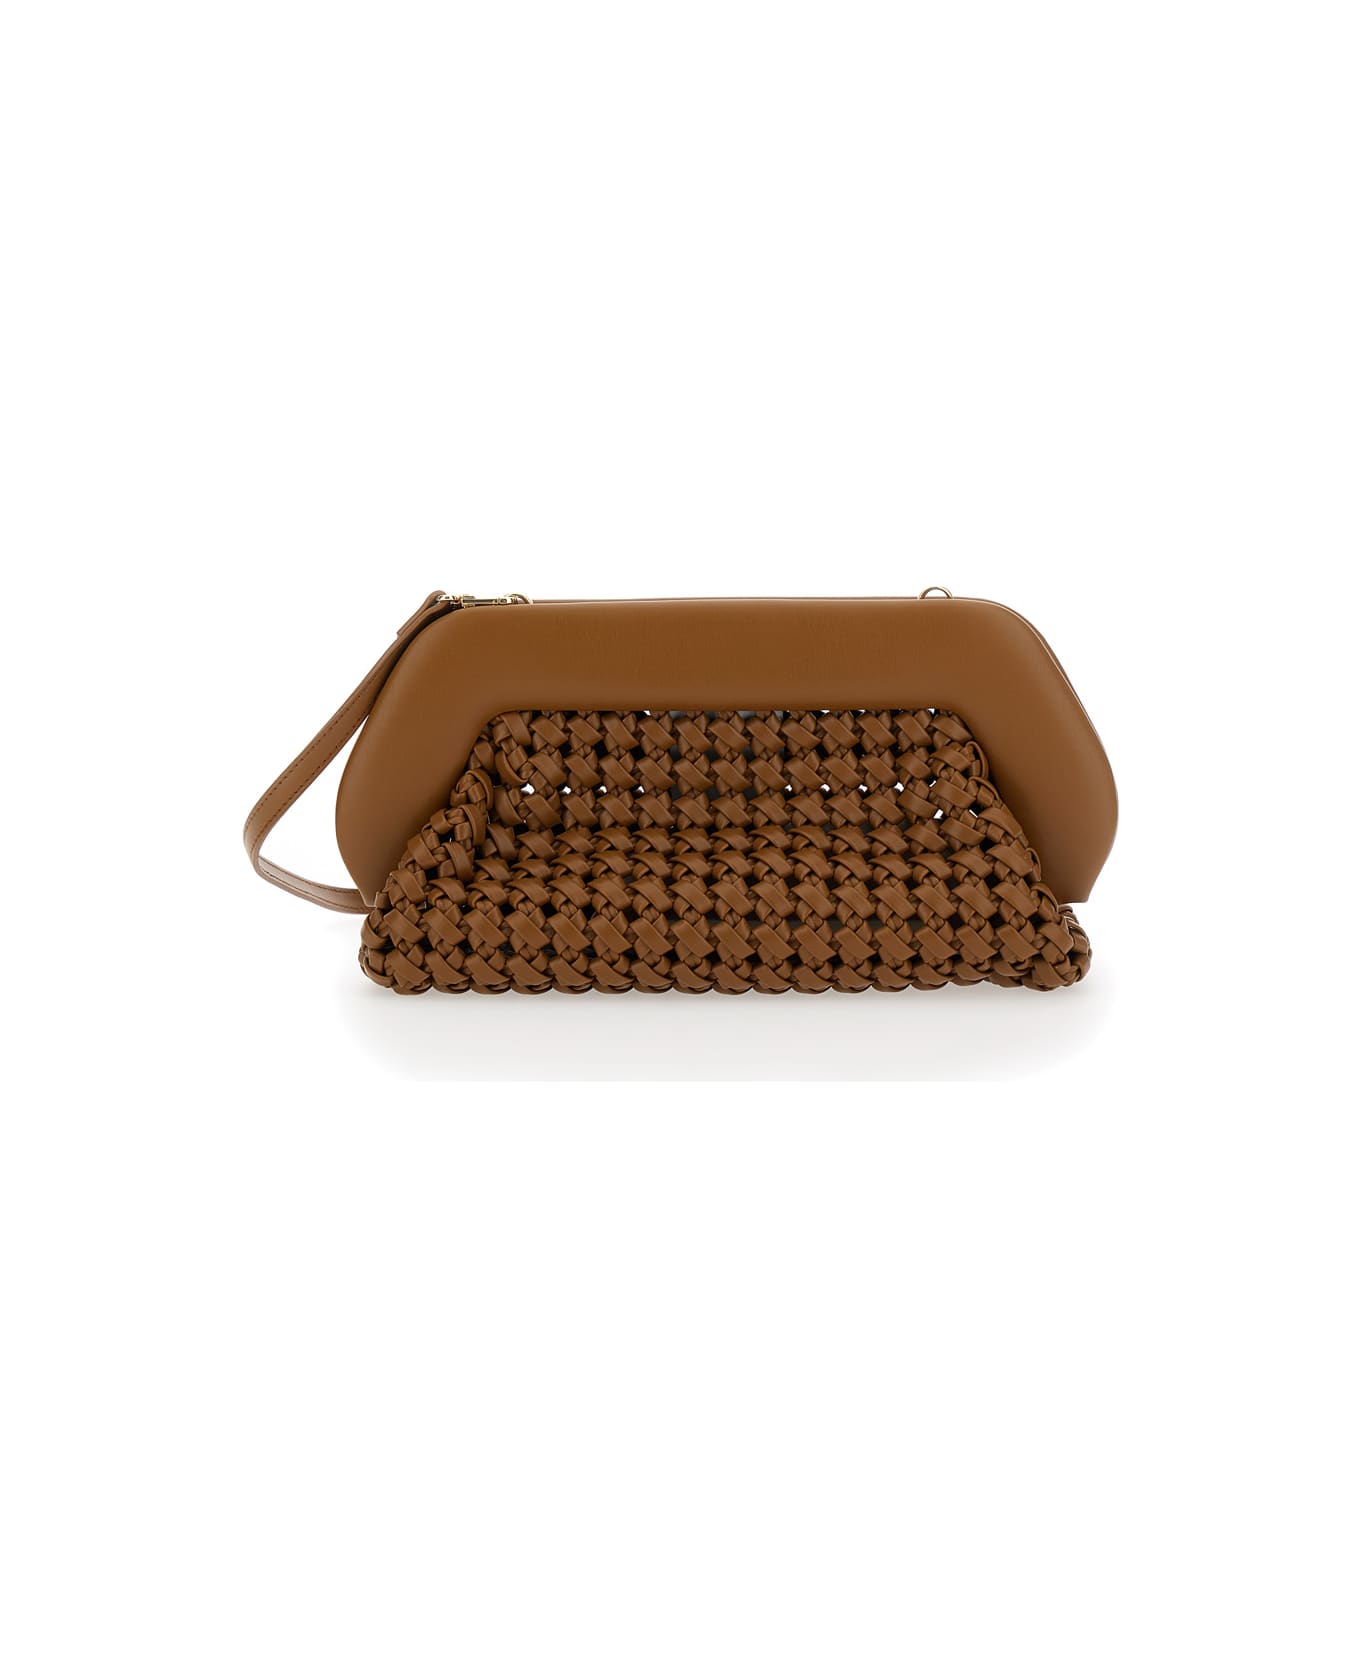 THEMOIRè 'bios Knots' Brown Clutch Bag With Braided Design In Eco Leather Woman - Brown クラッチバッグ